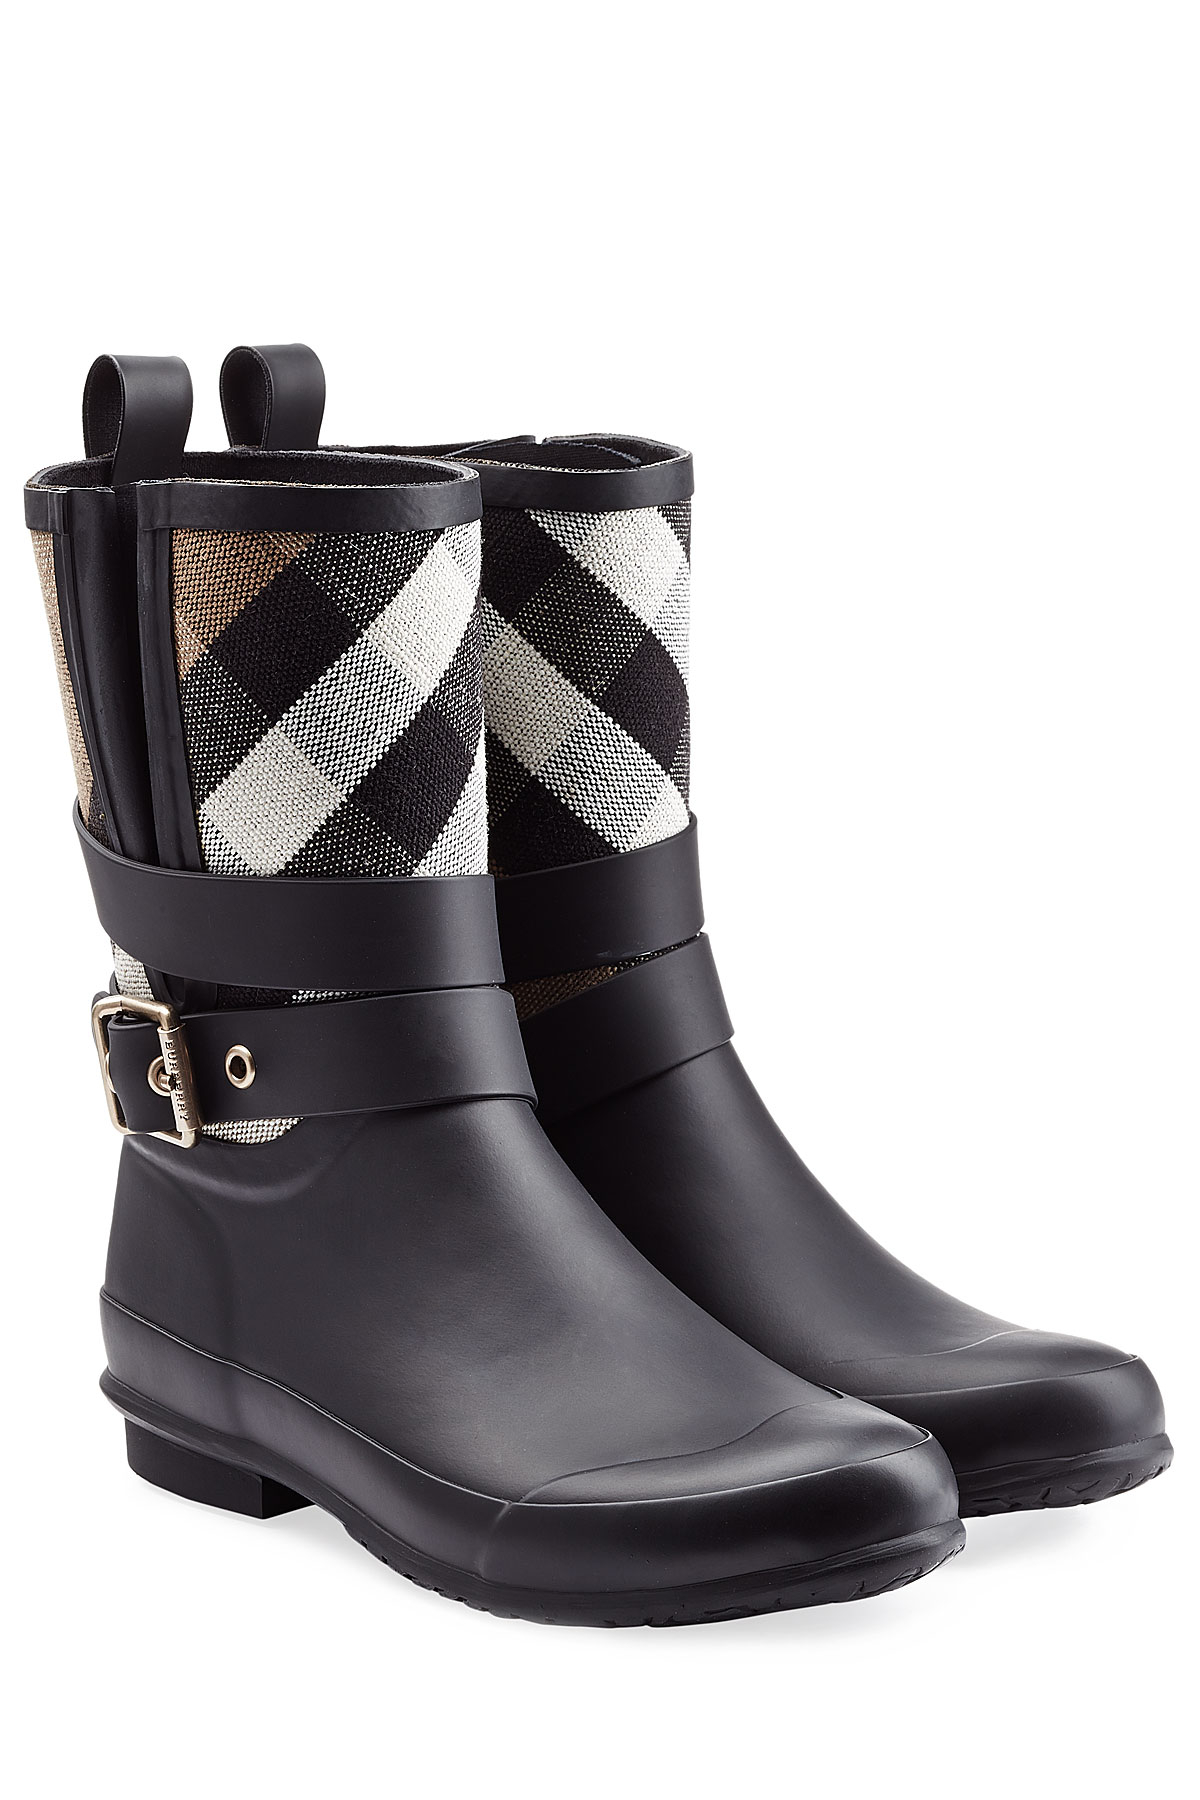 Burberry Holloway Rubber Rain Boots - Black in Black | Lyst